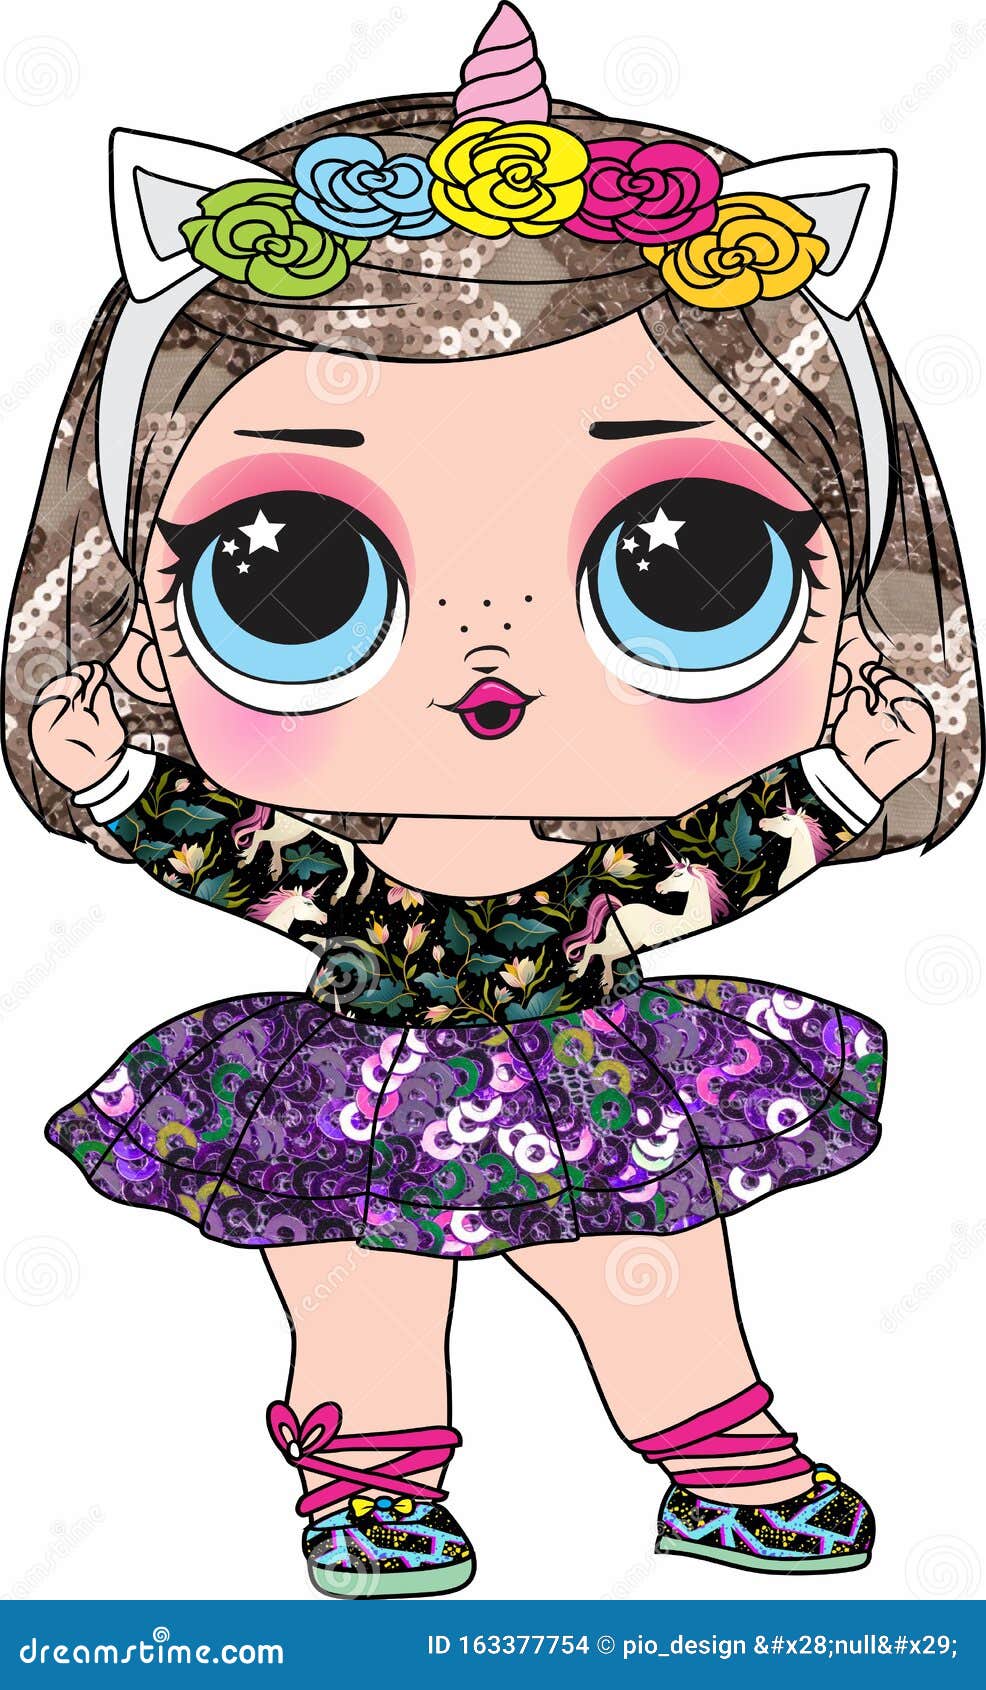 Cute doll lol surprise stock vector. Illustration of cute - 163377754